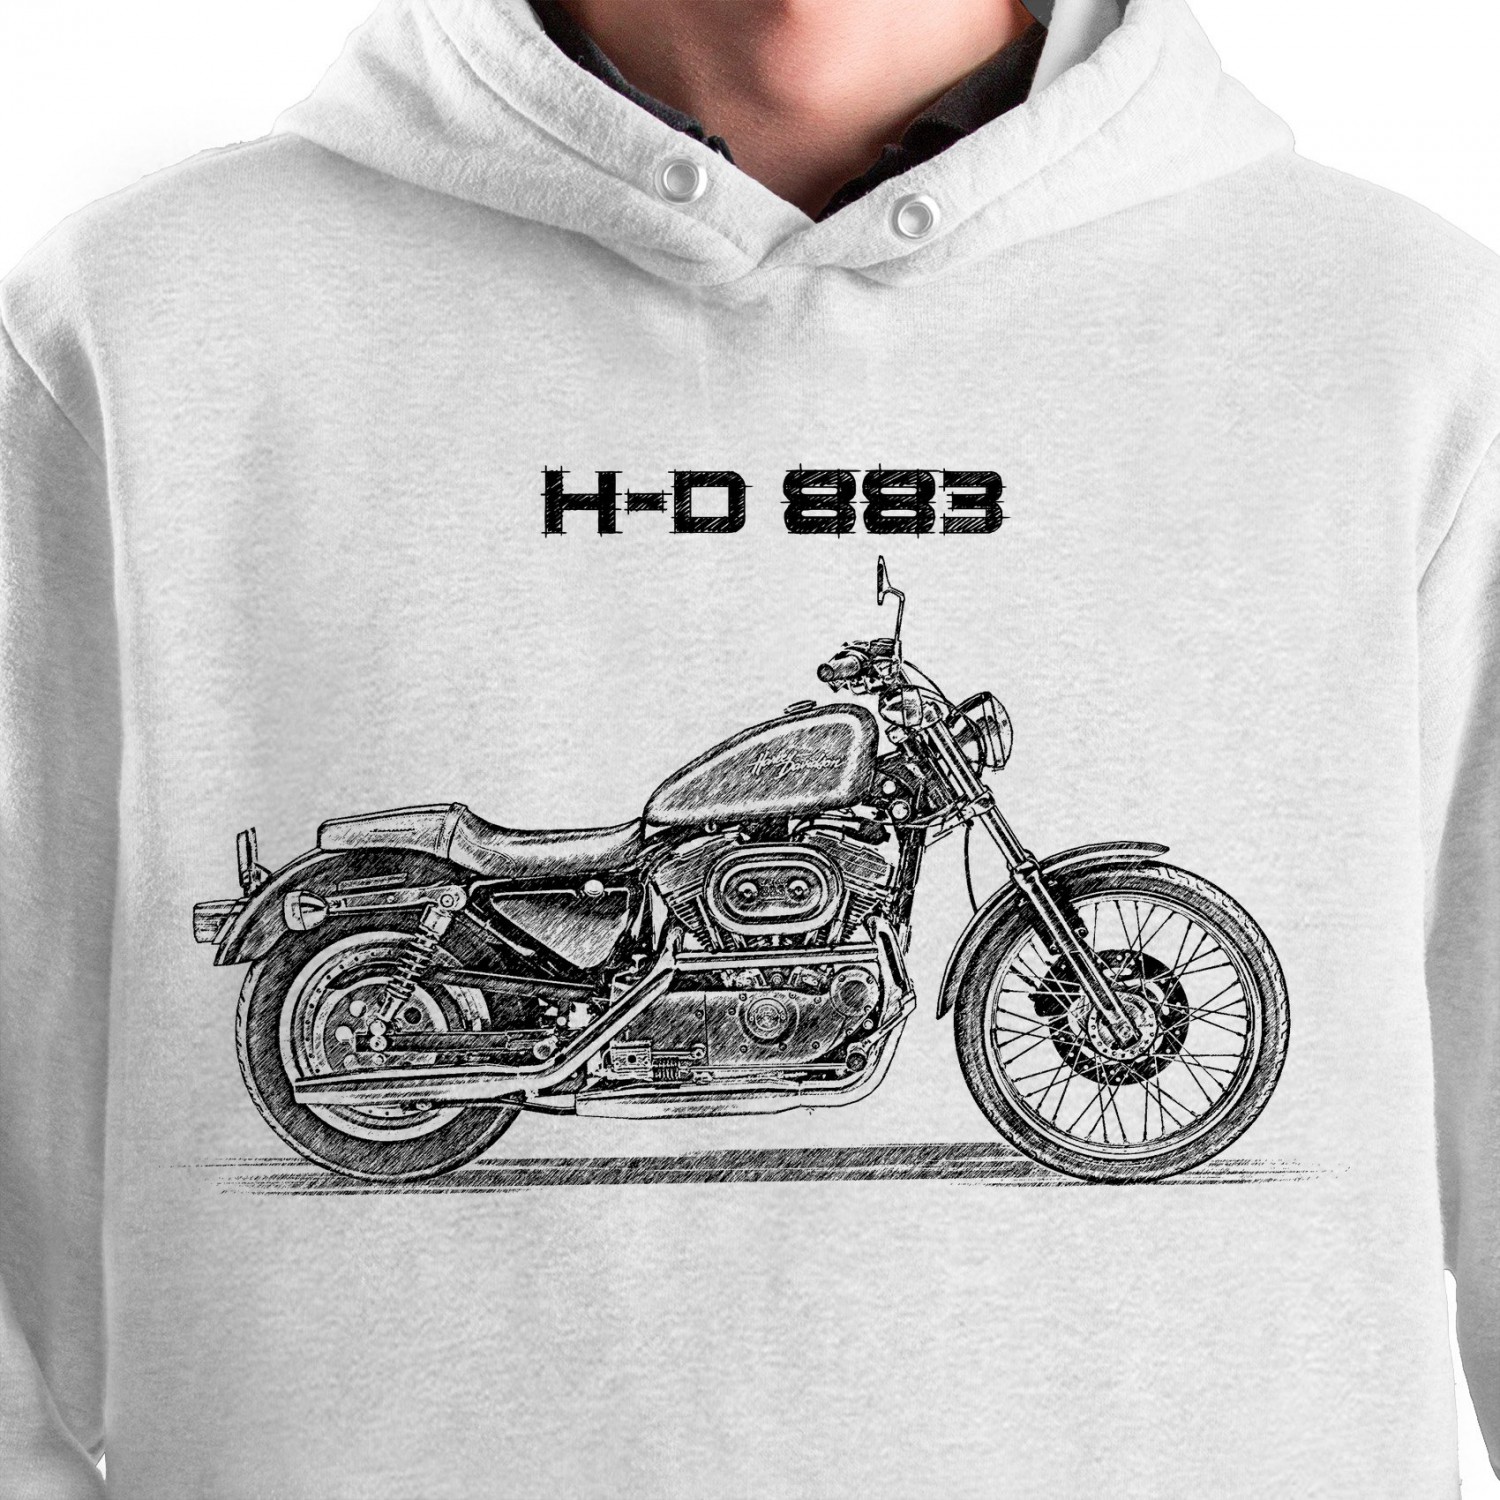 White T-shirt with Harley Davidson 883. Gift for motorcyclist.